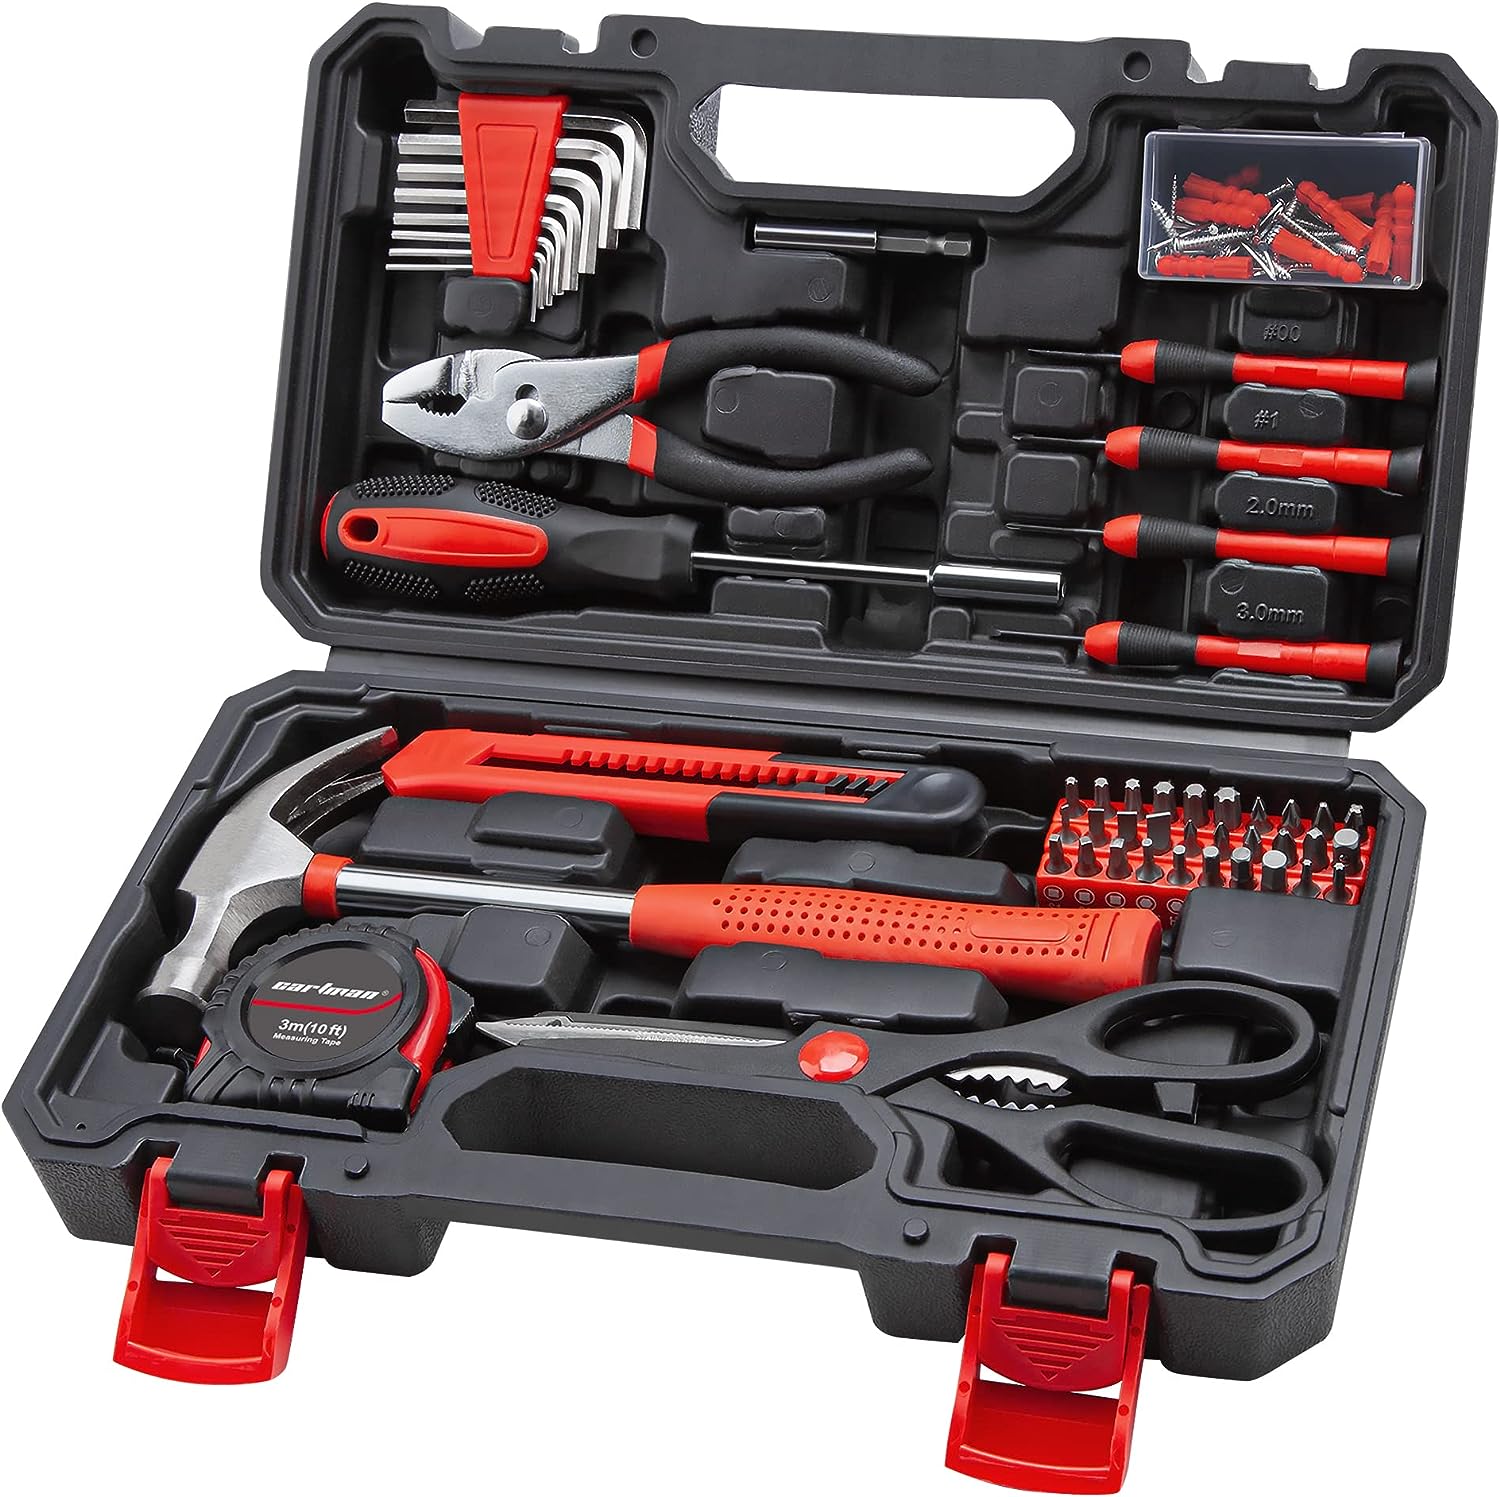 CARTMAN Tool Set General Household Hand Tool Kit with Plastic Toolbox Storage Case Red & Black
